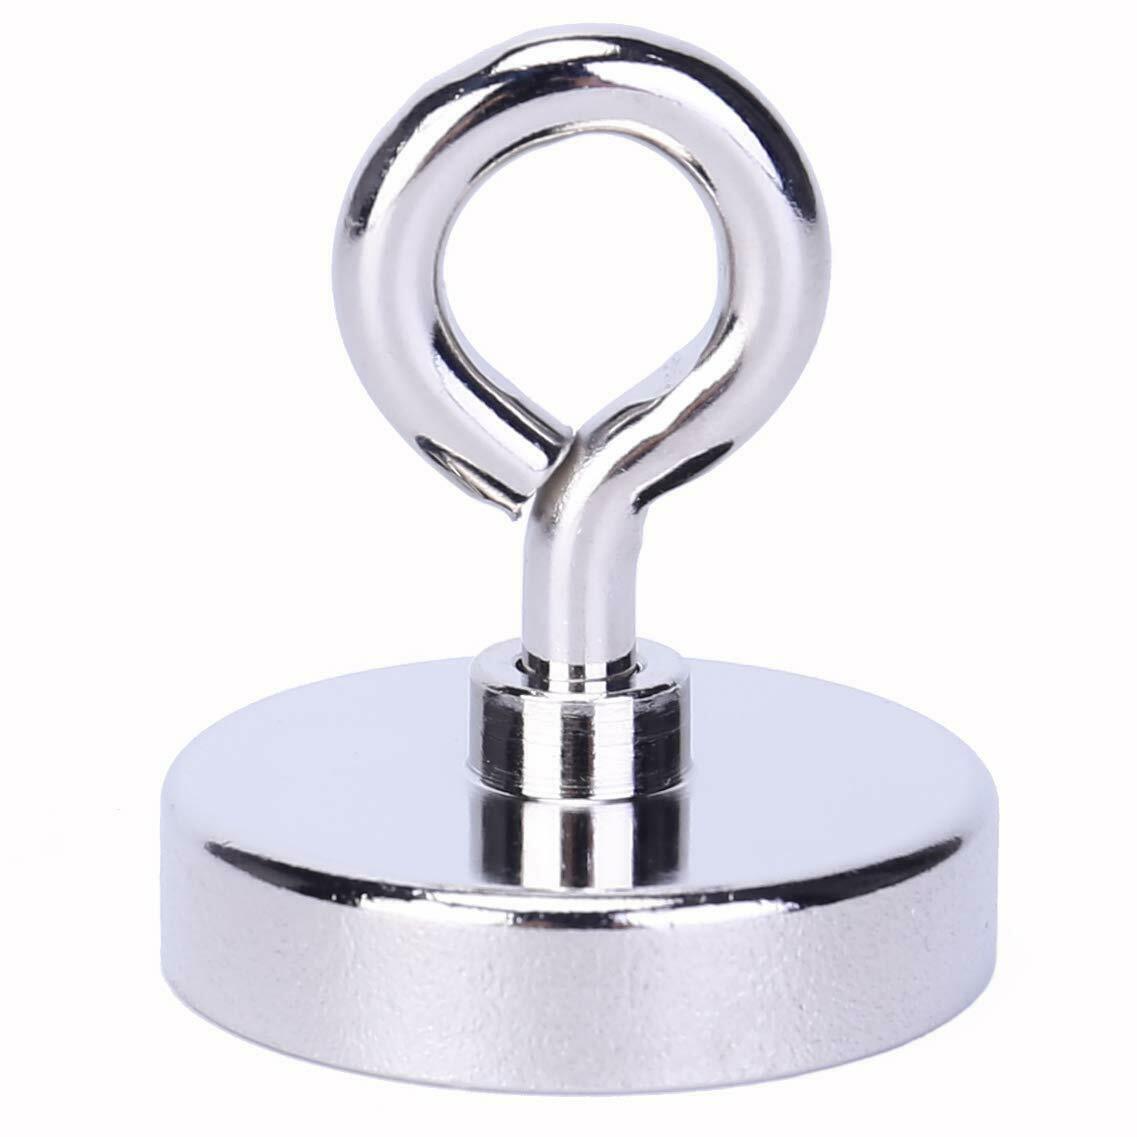 Fishing Magnet with Lifting Ring for Lake Treasure Hunt